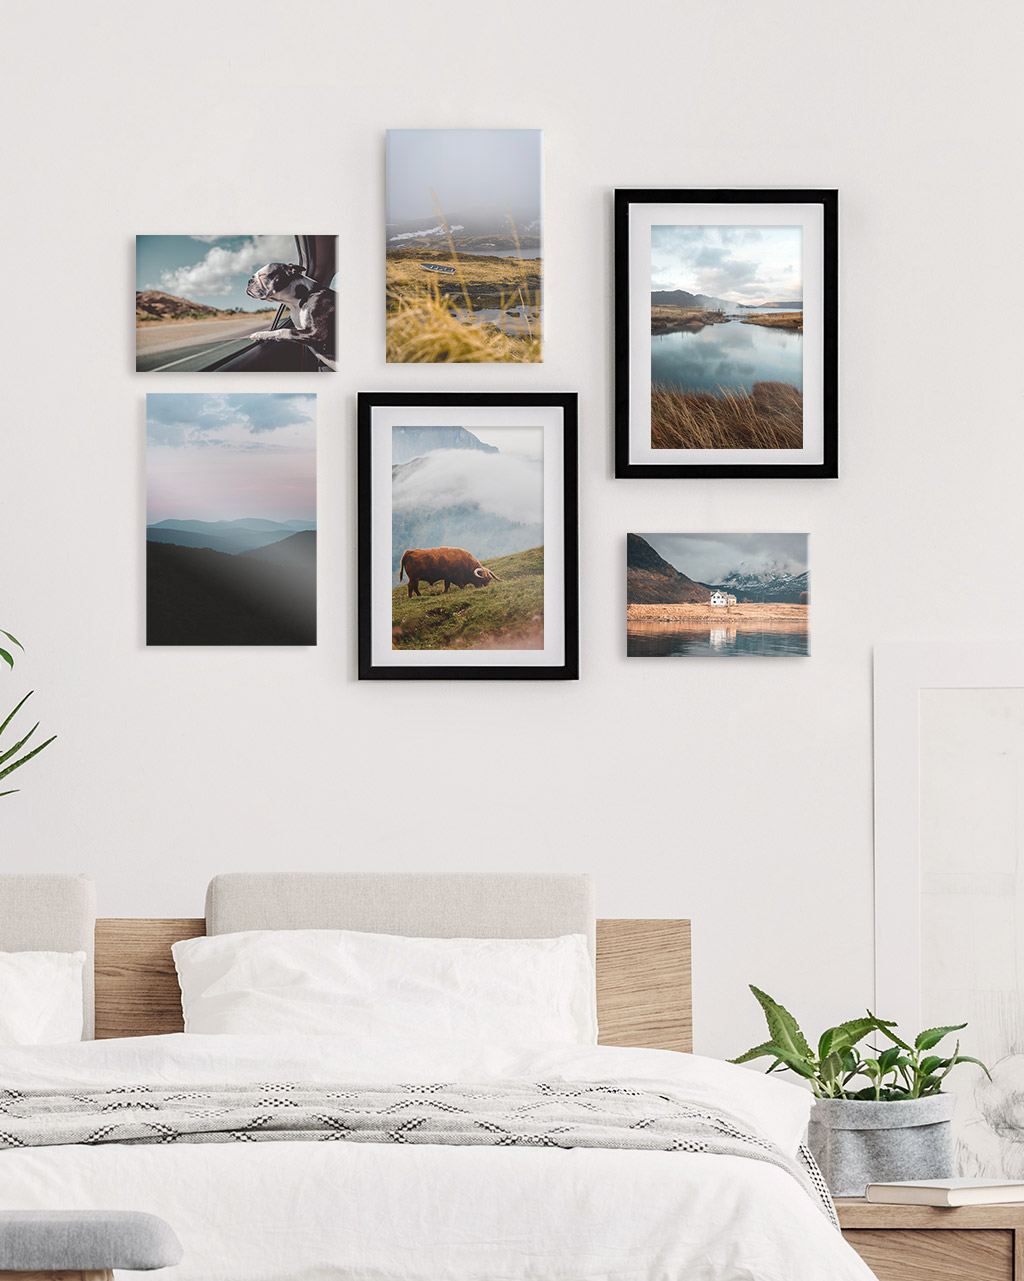 How to decorate with canvas prints